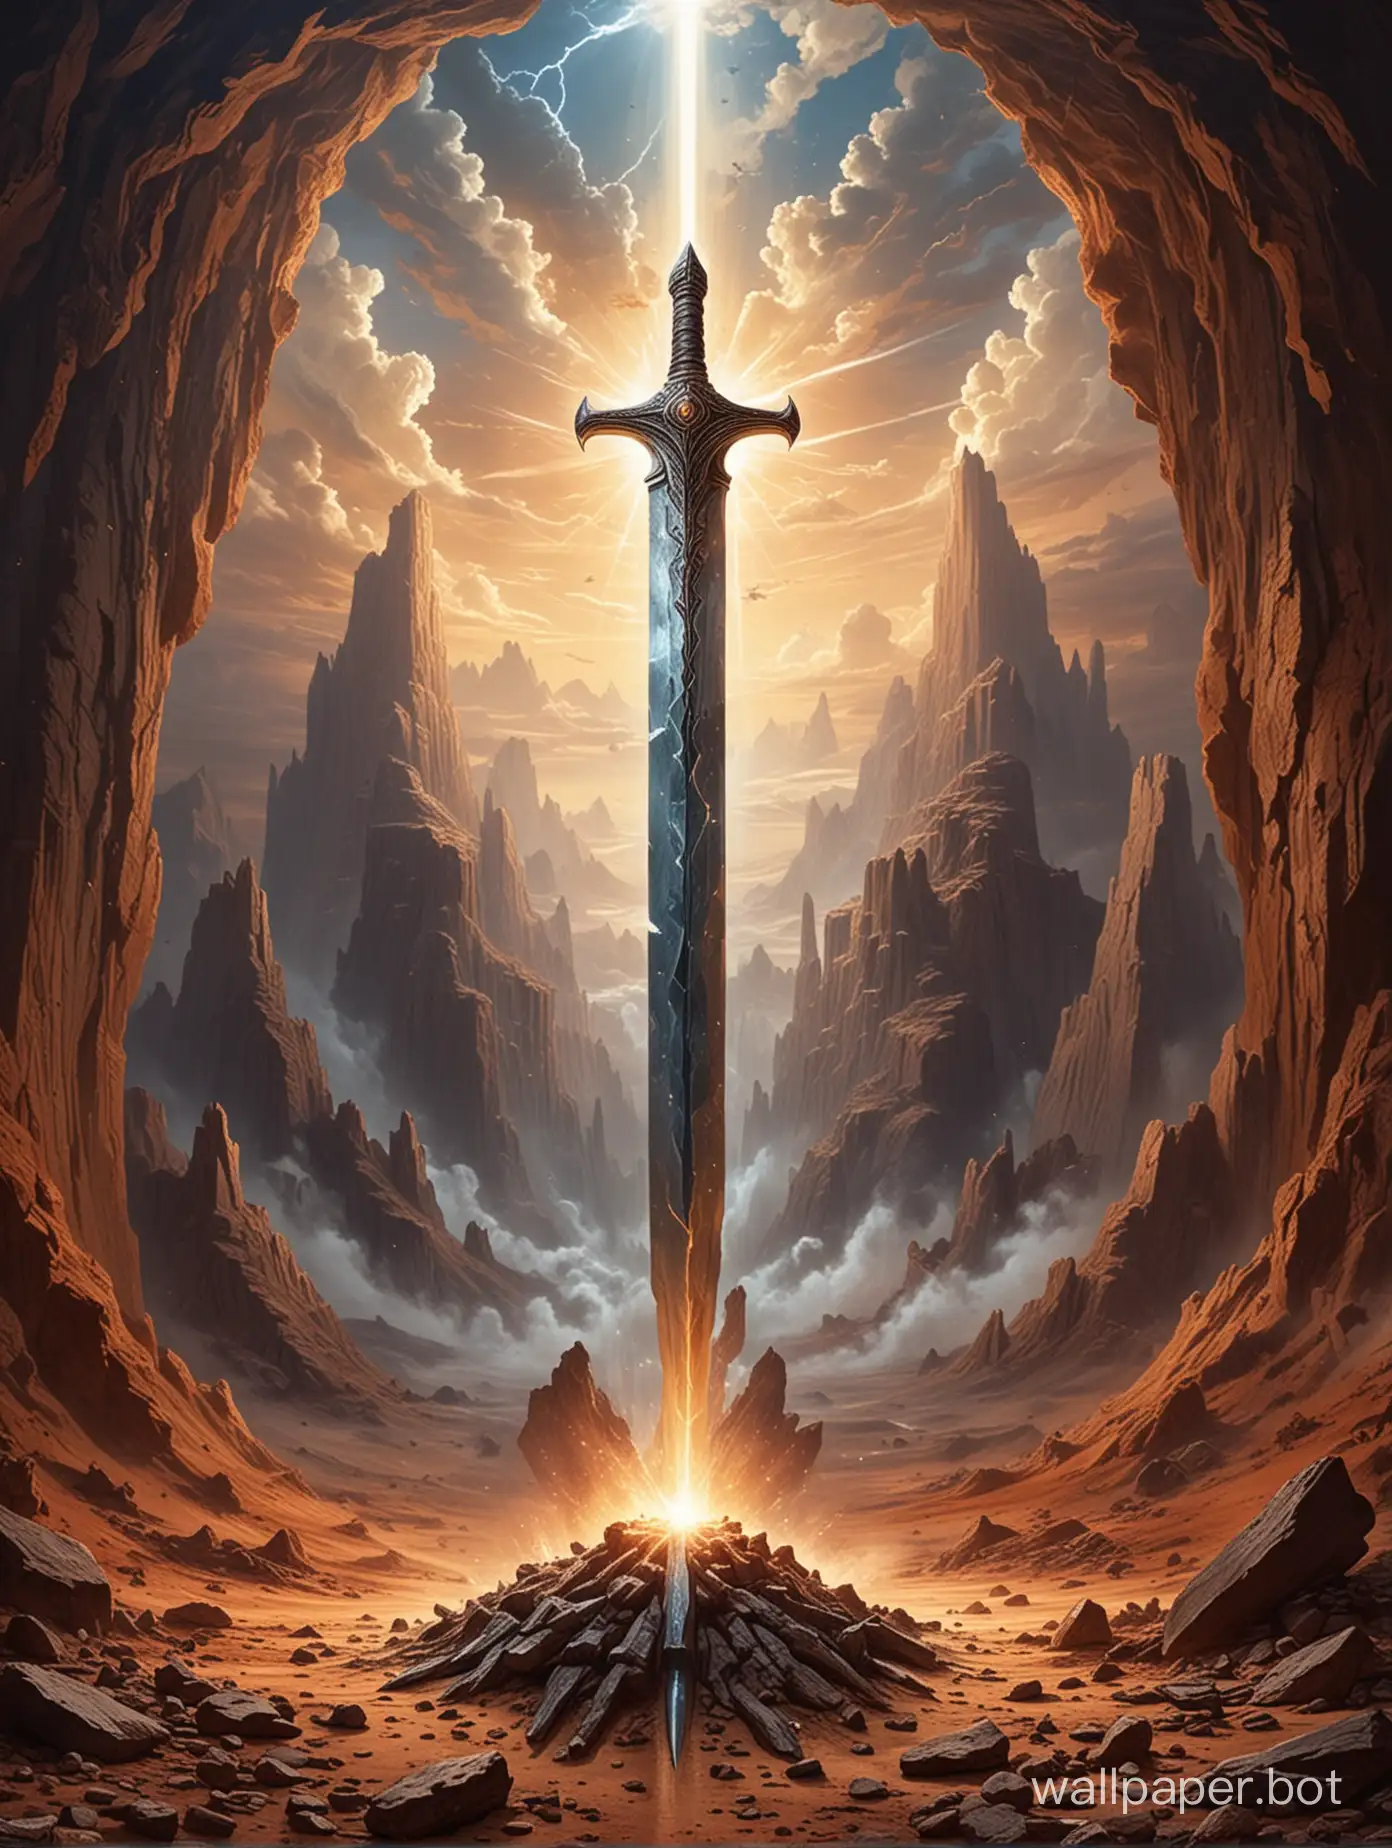 enormous god sword thrust into the crust of the earth which is a remnant from the past